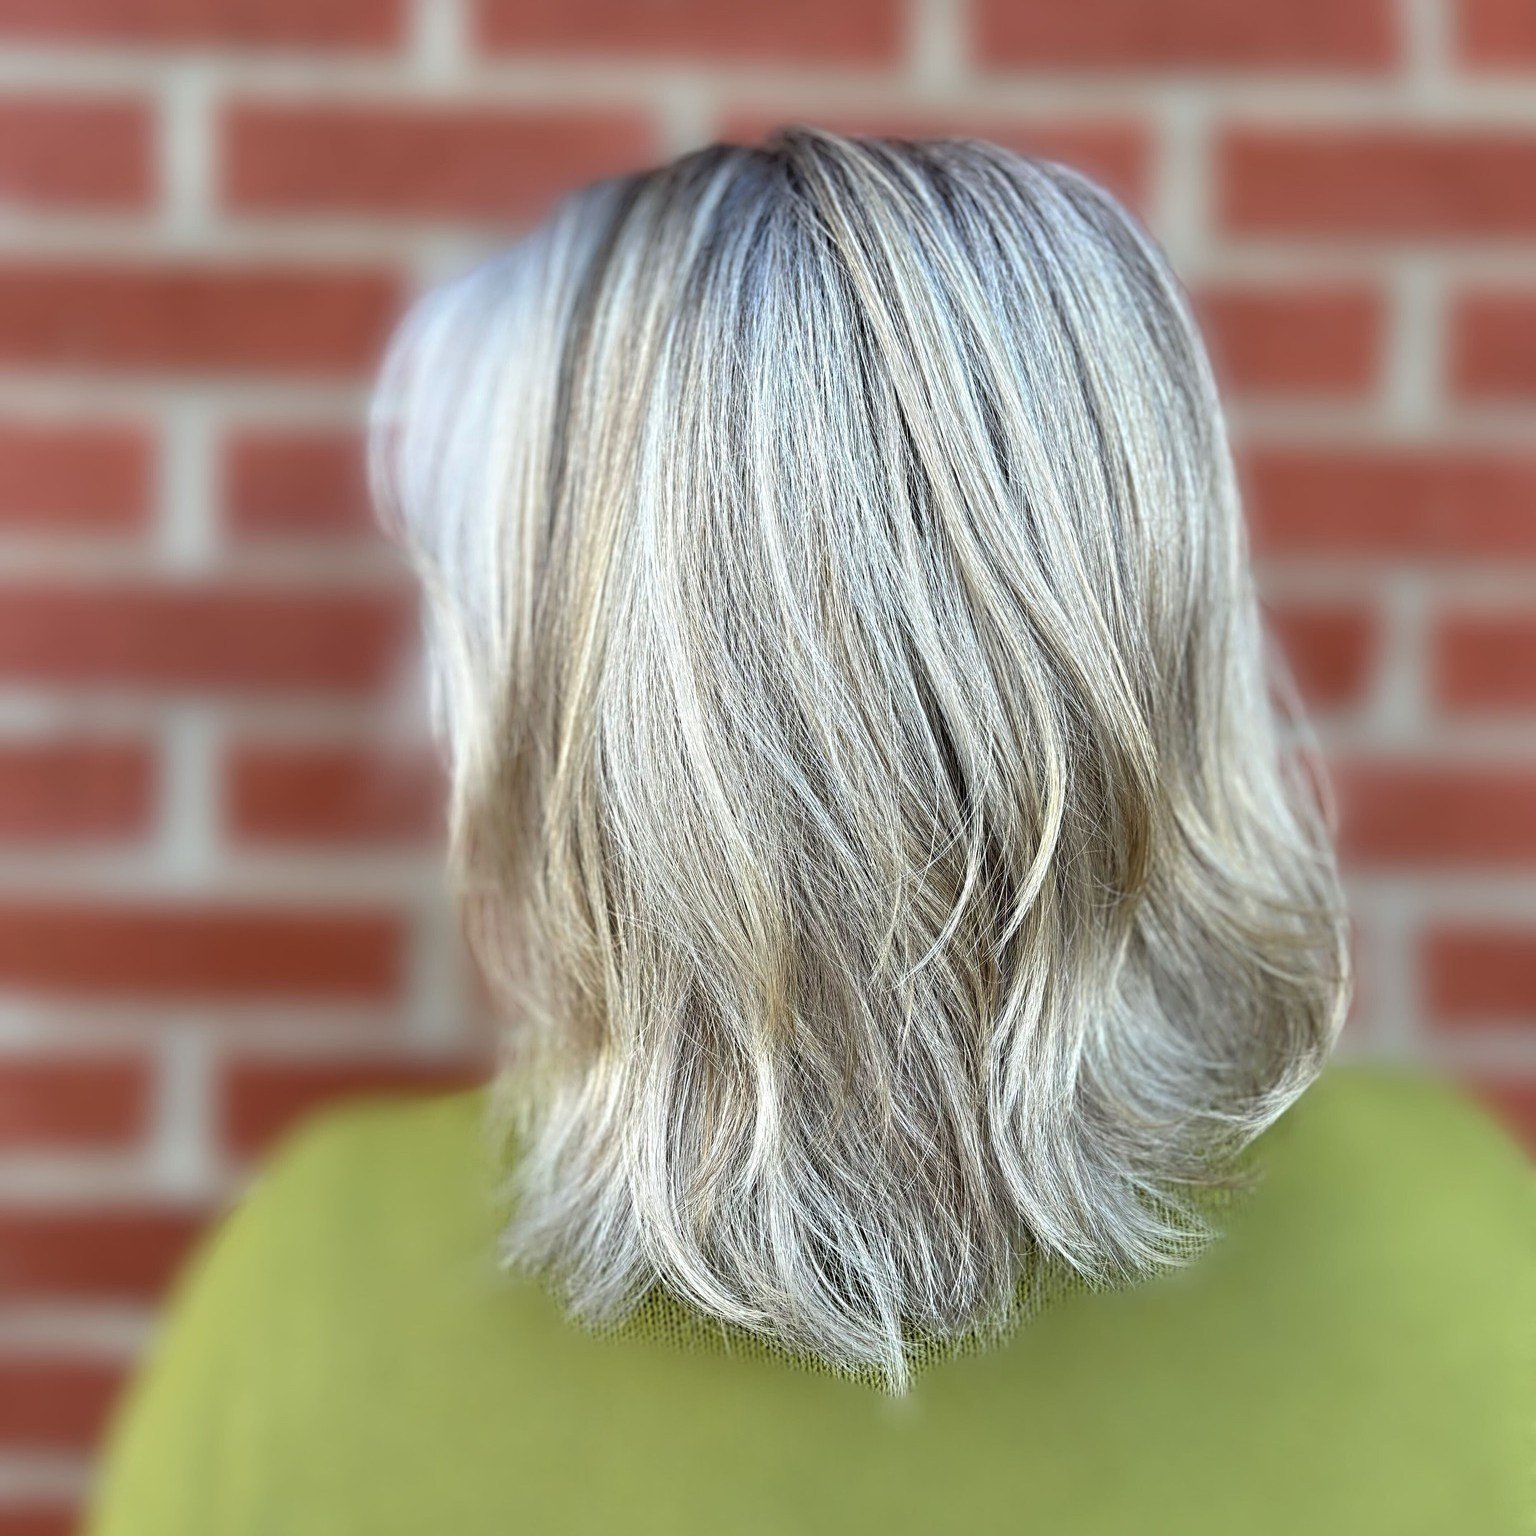 Gray blending never looked so good. 🌷🌼 Customized blonding/gray blending by Aurora @hair__by_b3lla 

 #davinessalon #discoverwakeforest #ncstylist #hairundone #wakeforest #hairundonesalon #wakeforestnc #hairstylistwakeforest #hairsalonwakeforest #9